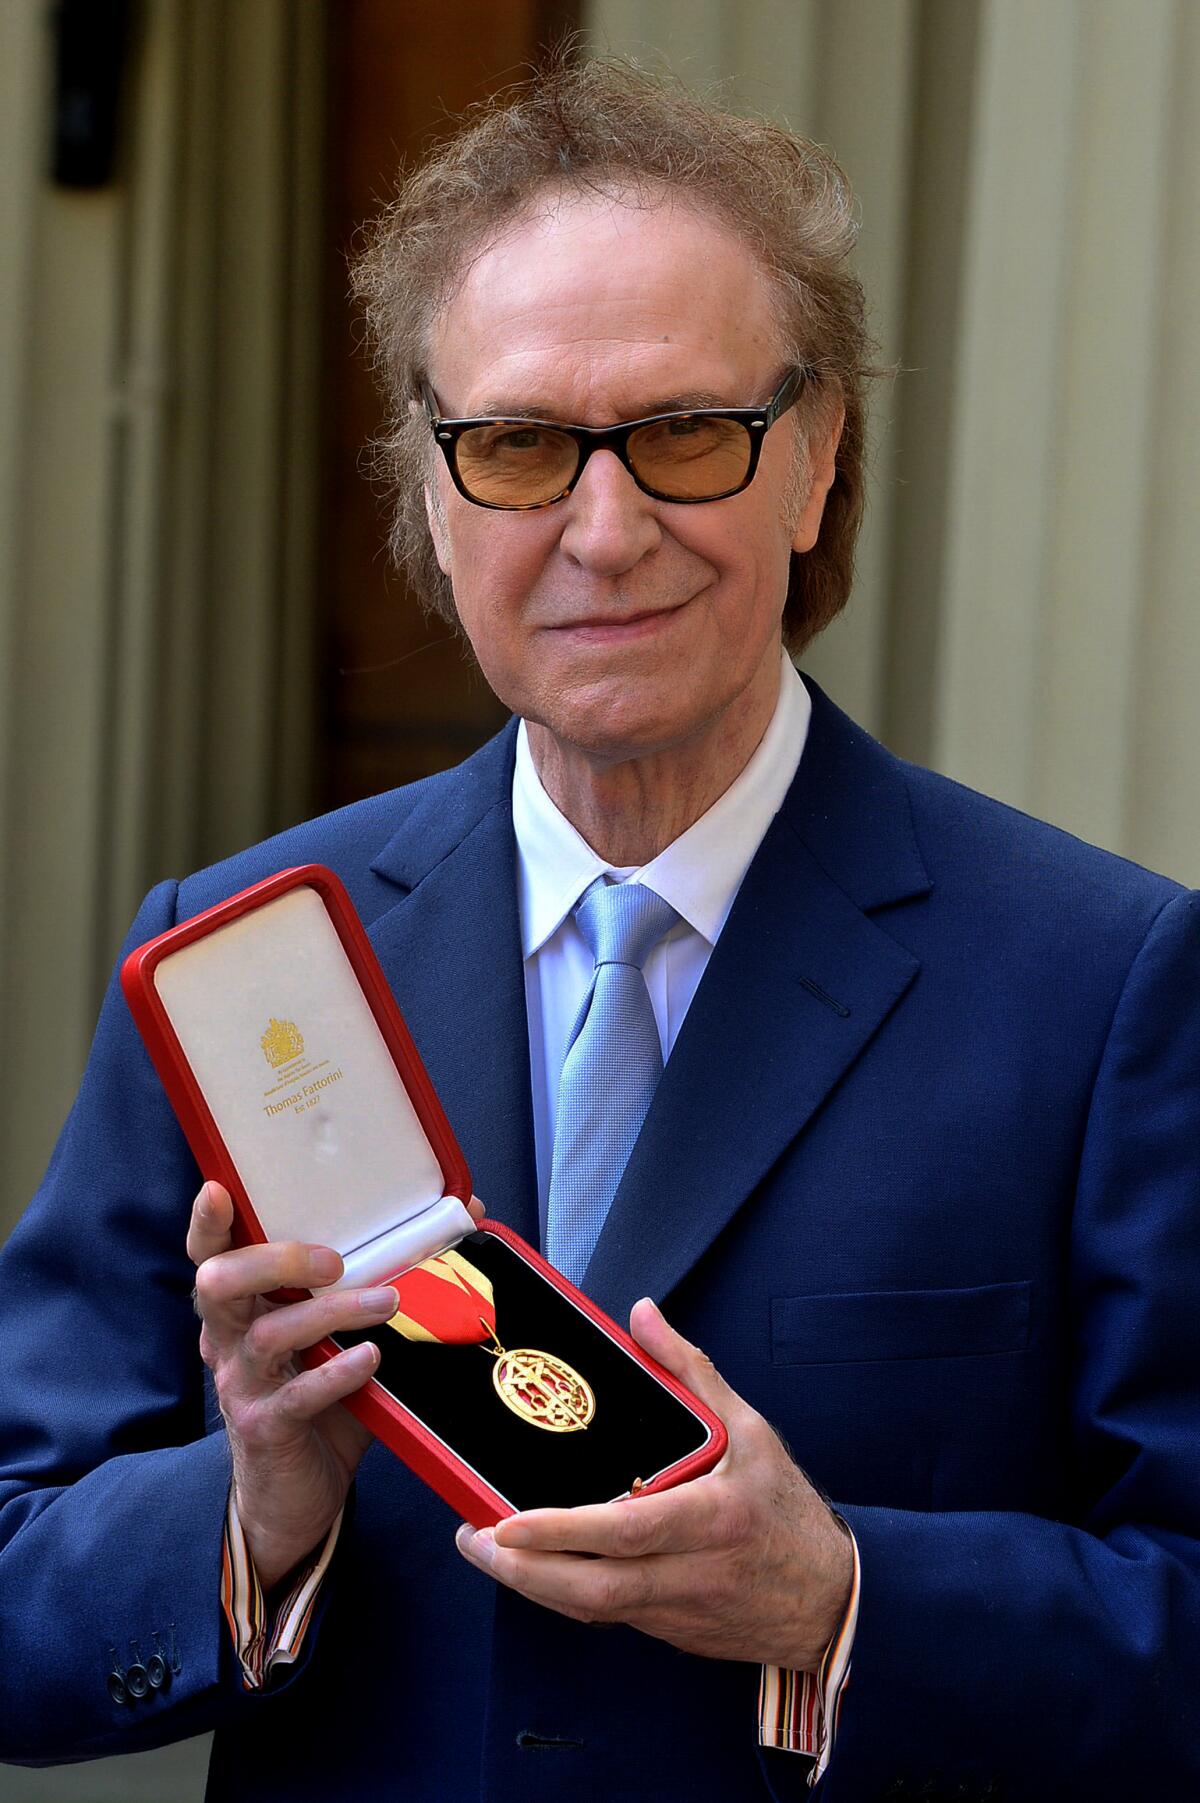 A elderly man holding a medal in a case